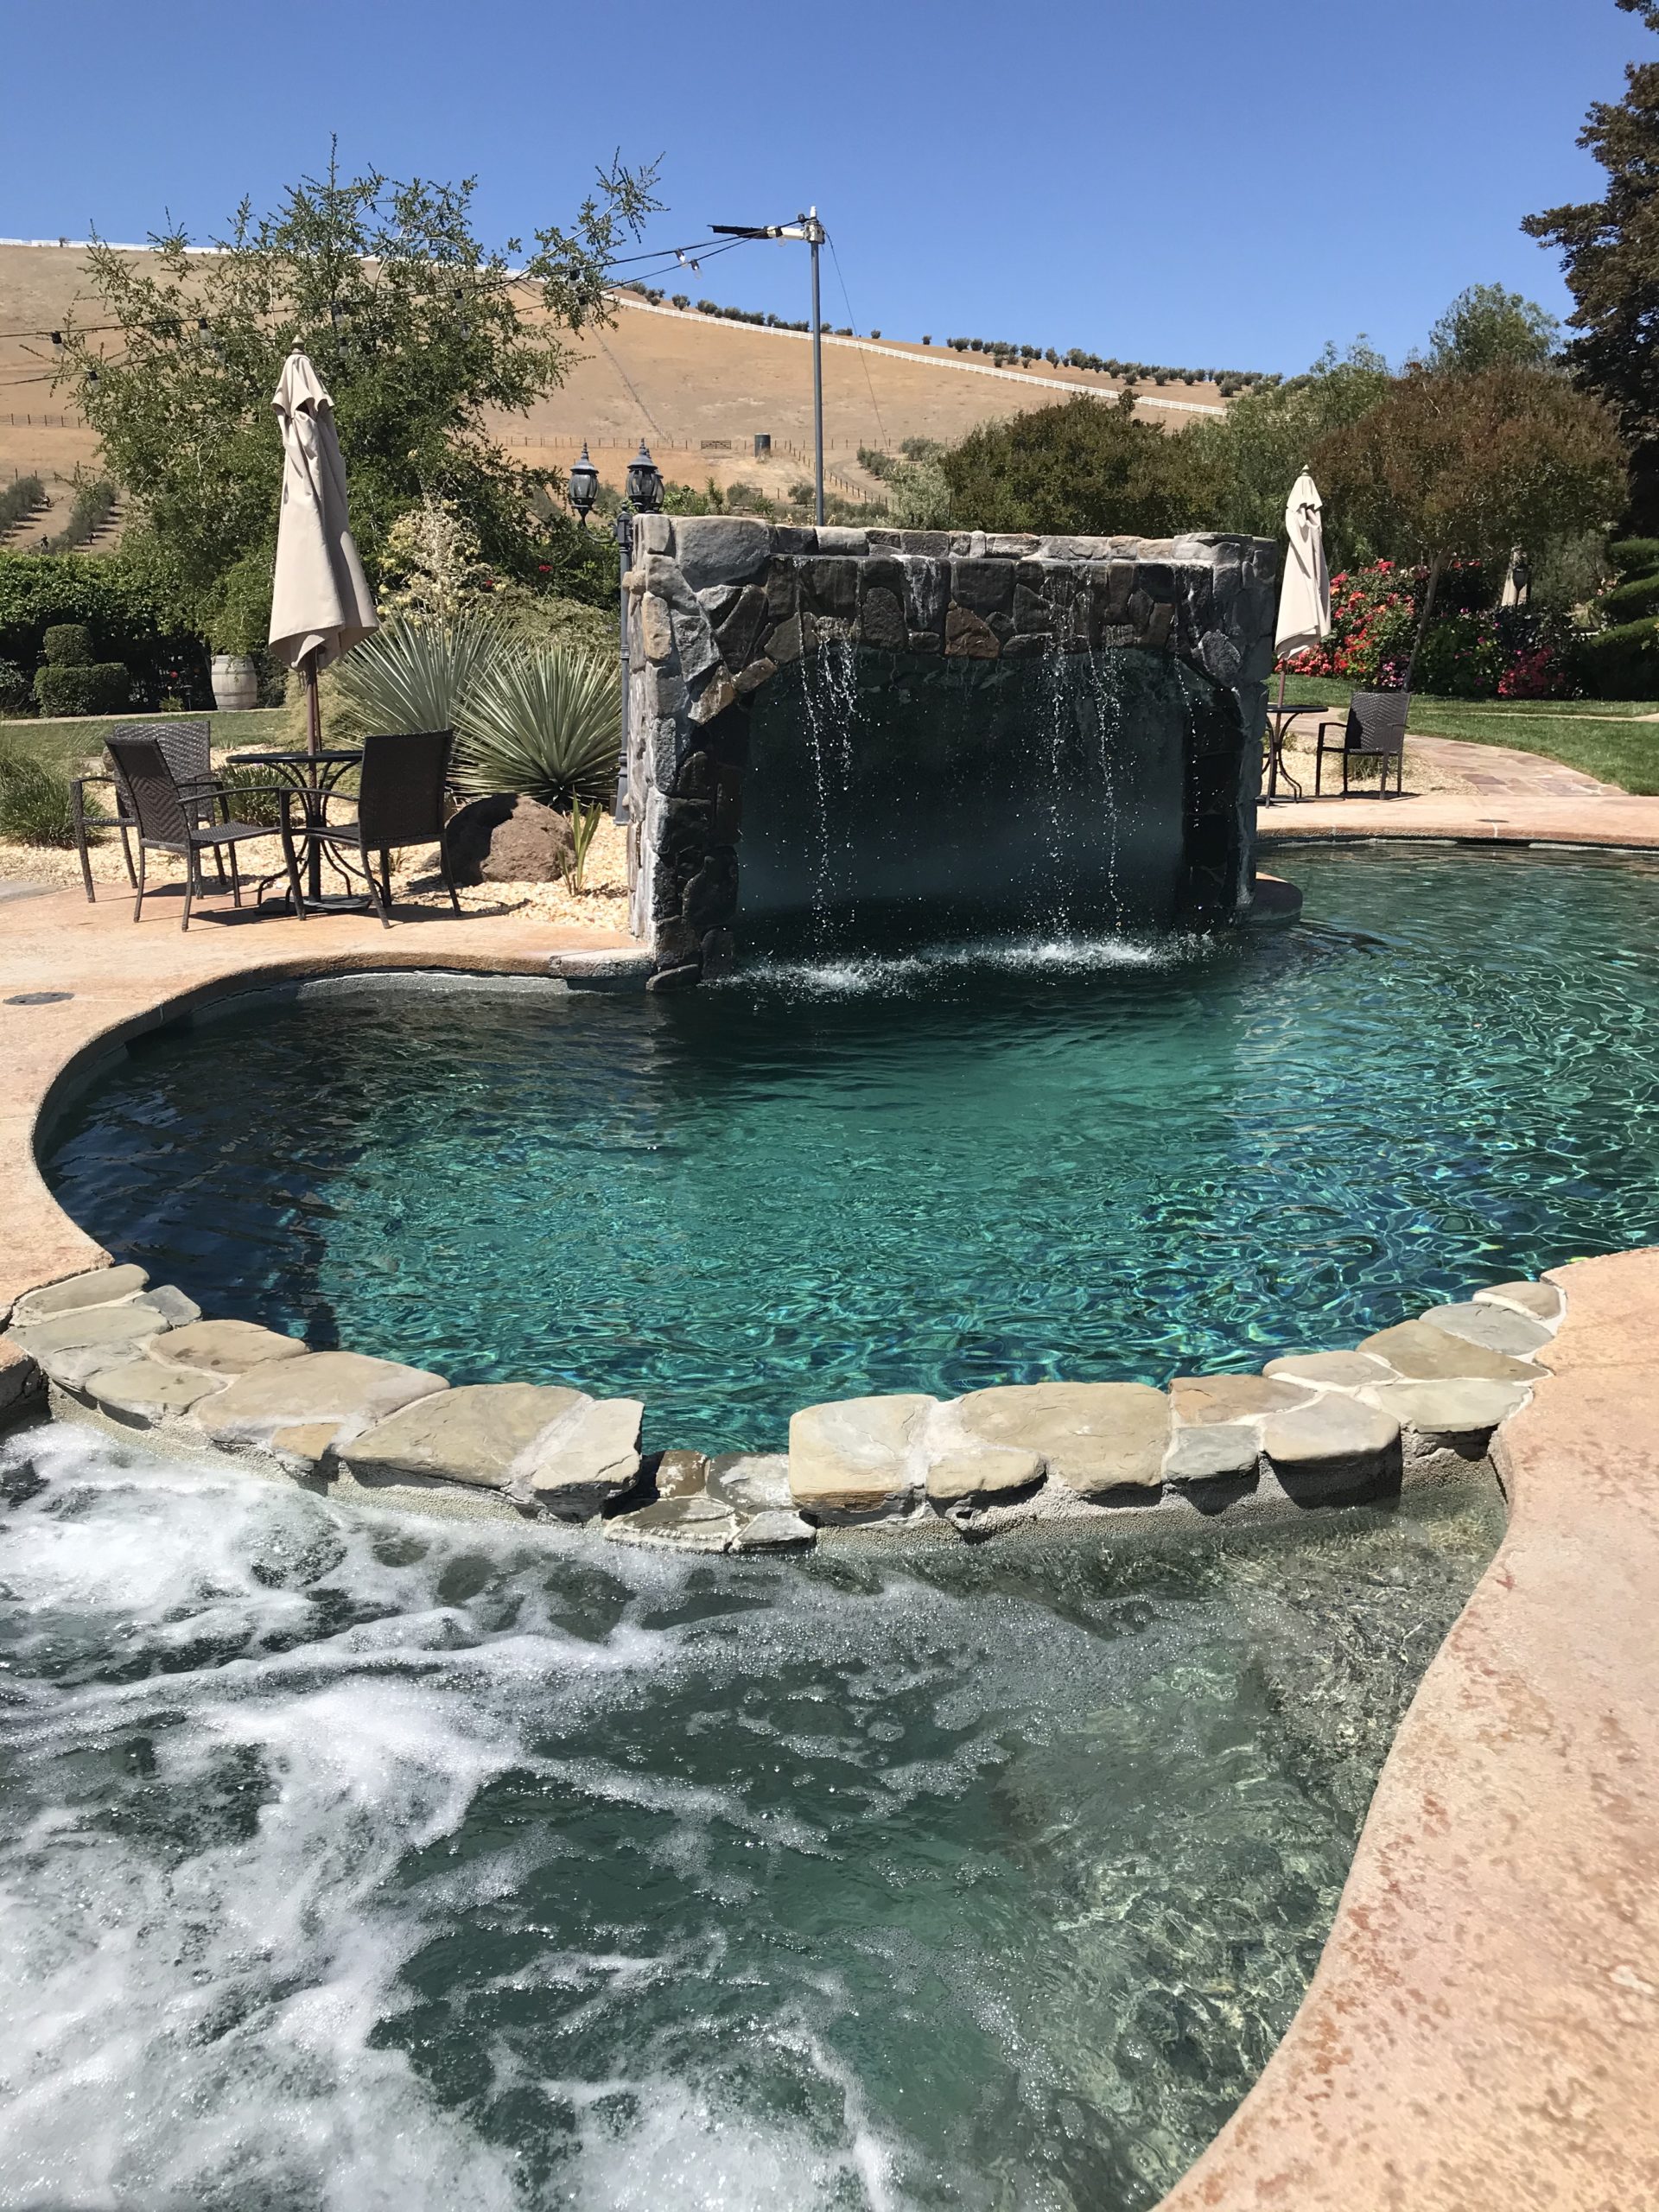 Purple Orchid Wine Country Resort & Spa